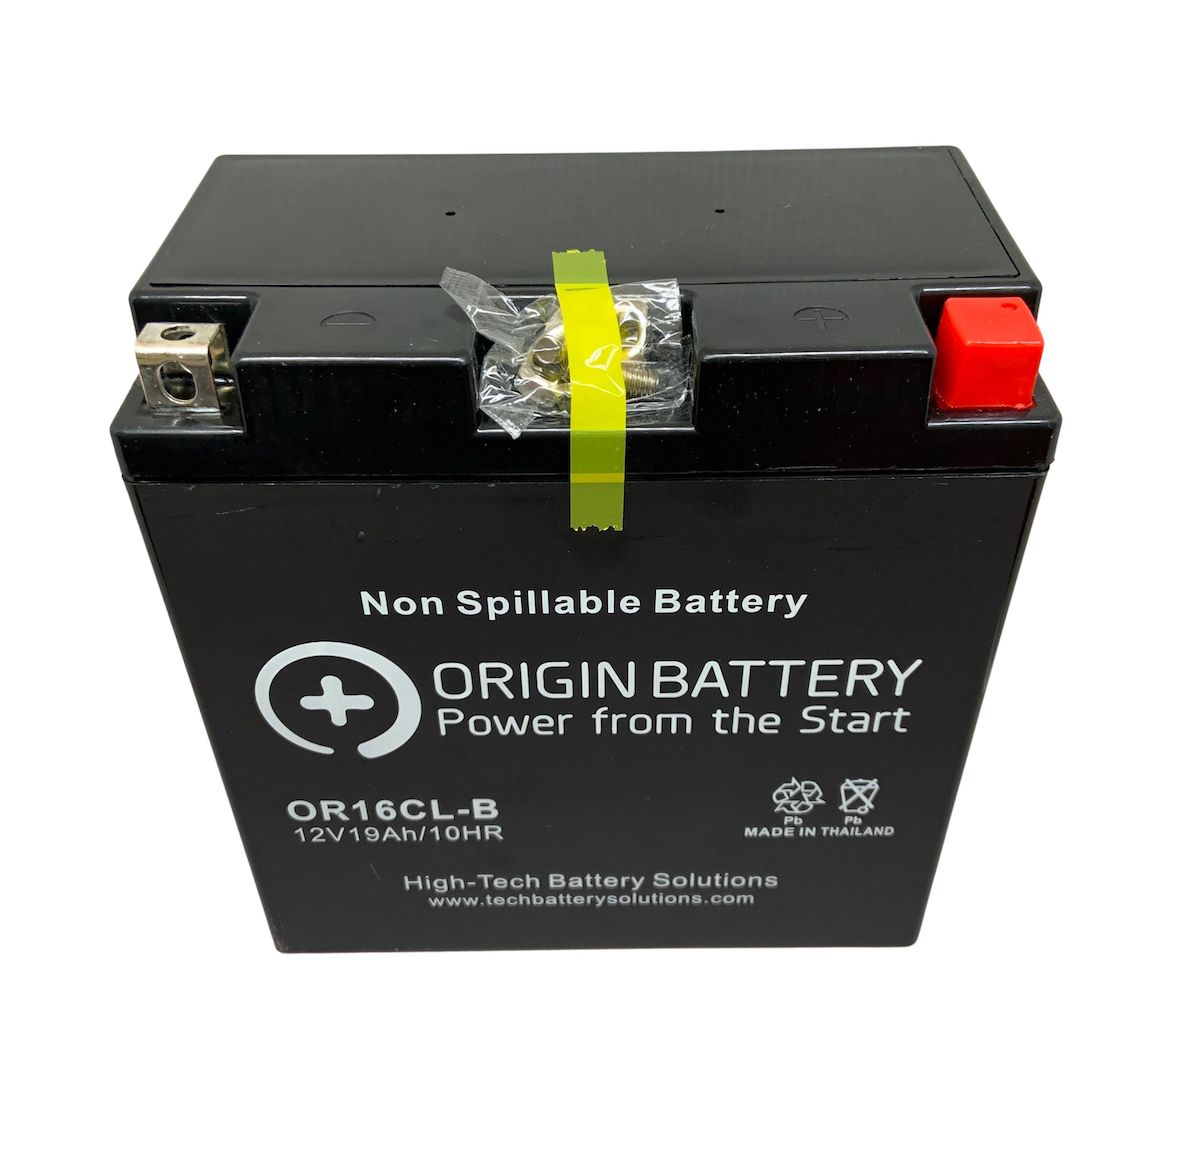 will this battery work for an Argo 600?